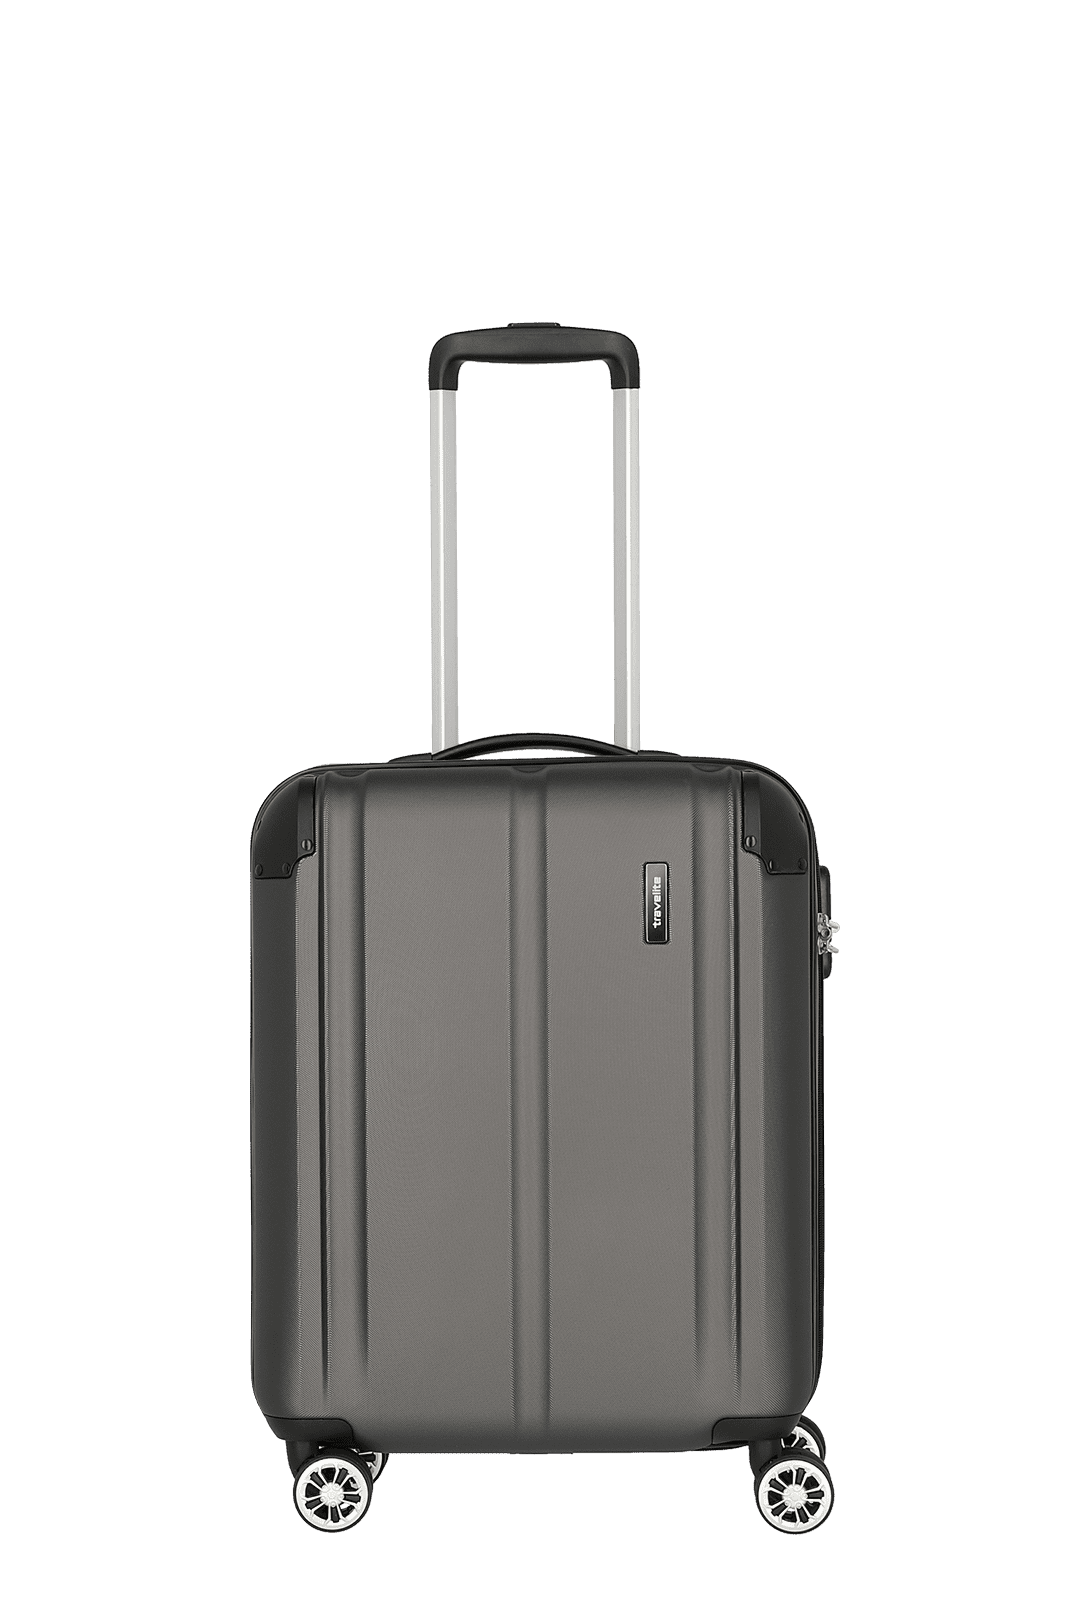 City suitcase color shell (55cm) in size S green travelite hard 